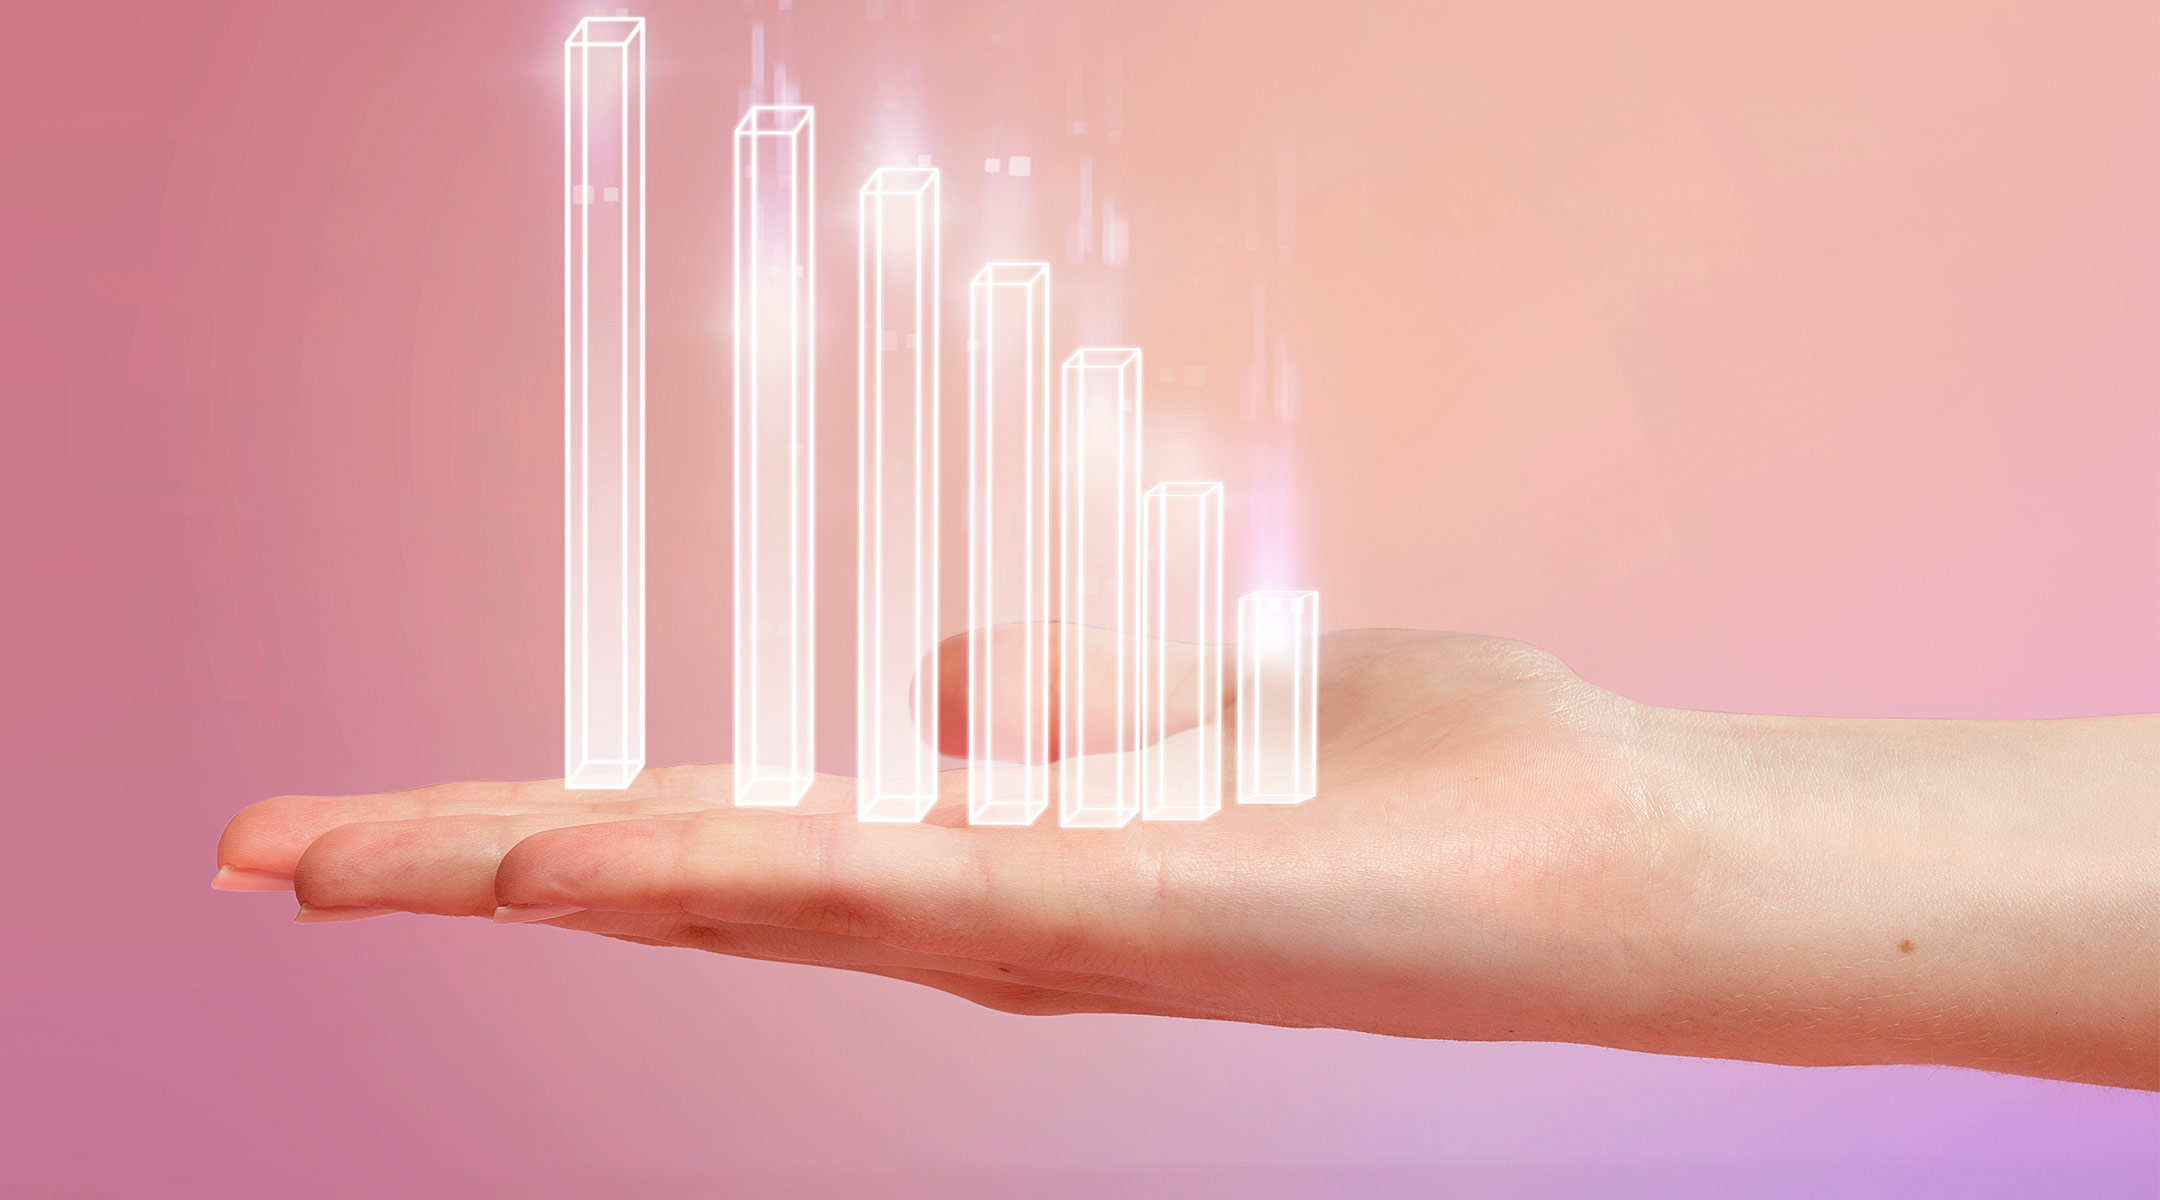 conceptual image of hand holding neon increasing bar graph